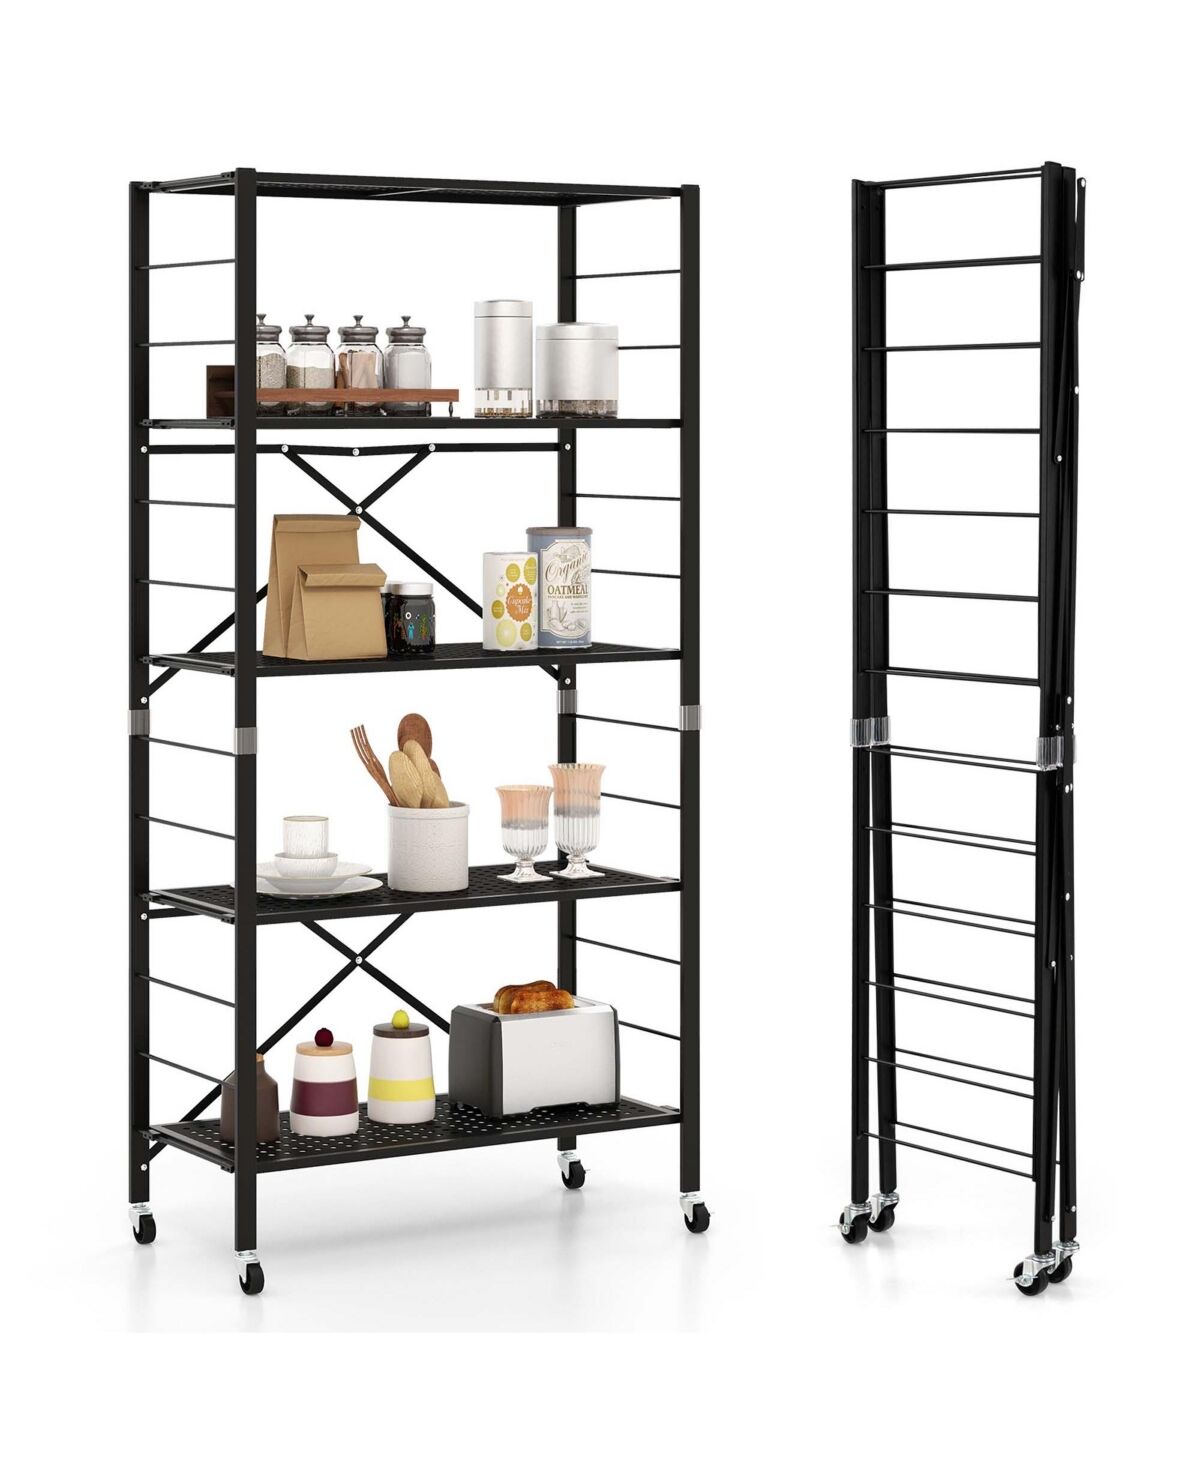 Costway 5-Tier Foldable Storage Shelves Adjustable Collapsible Organizer Rack with Wheels - Black